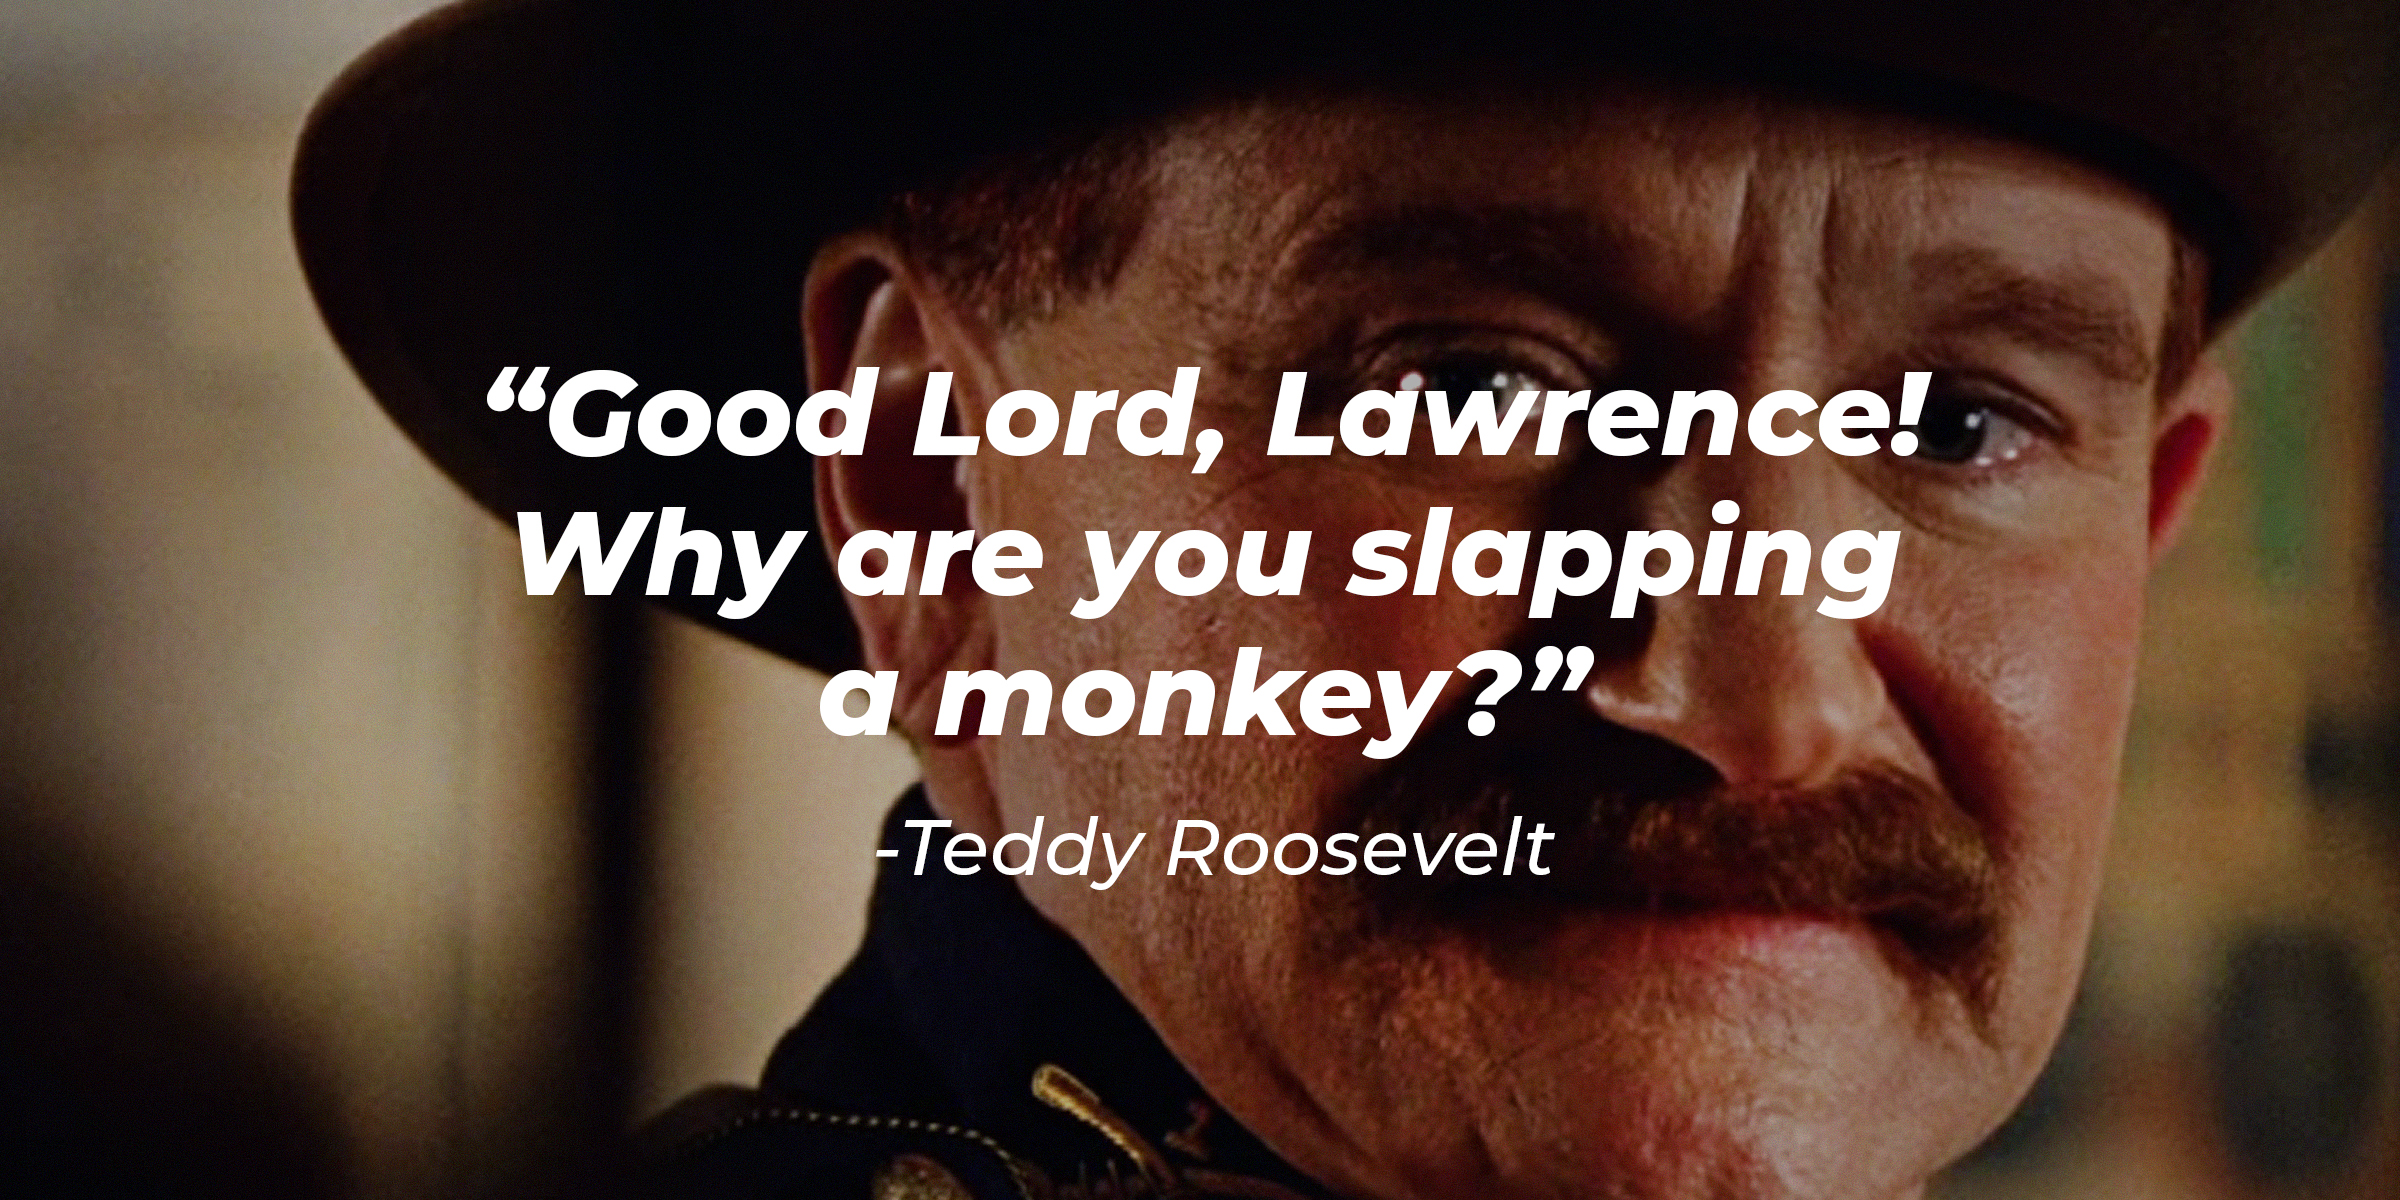 A photo of Teddy Roosevelt with Teddy Roosevelt's quote: “Good Lord, Lawrence! Why are you slapping a monkey?” | Source: facebook.com/NightAtTheMuseumMovies